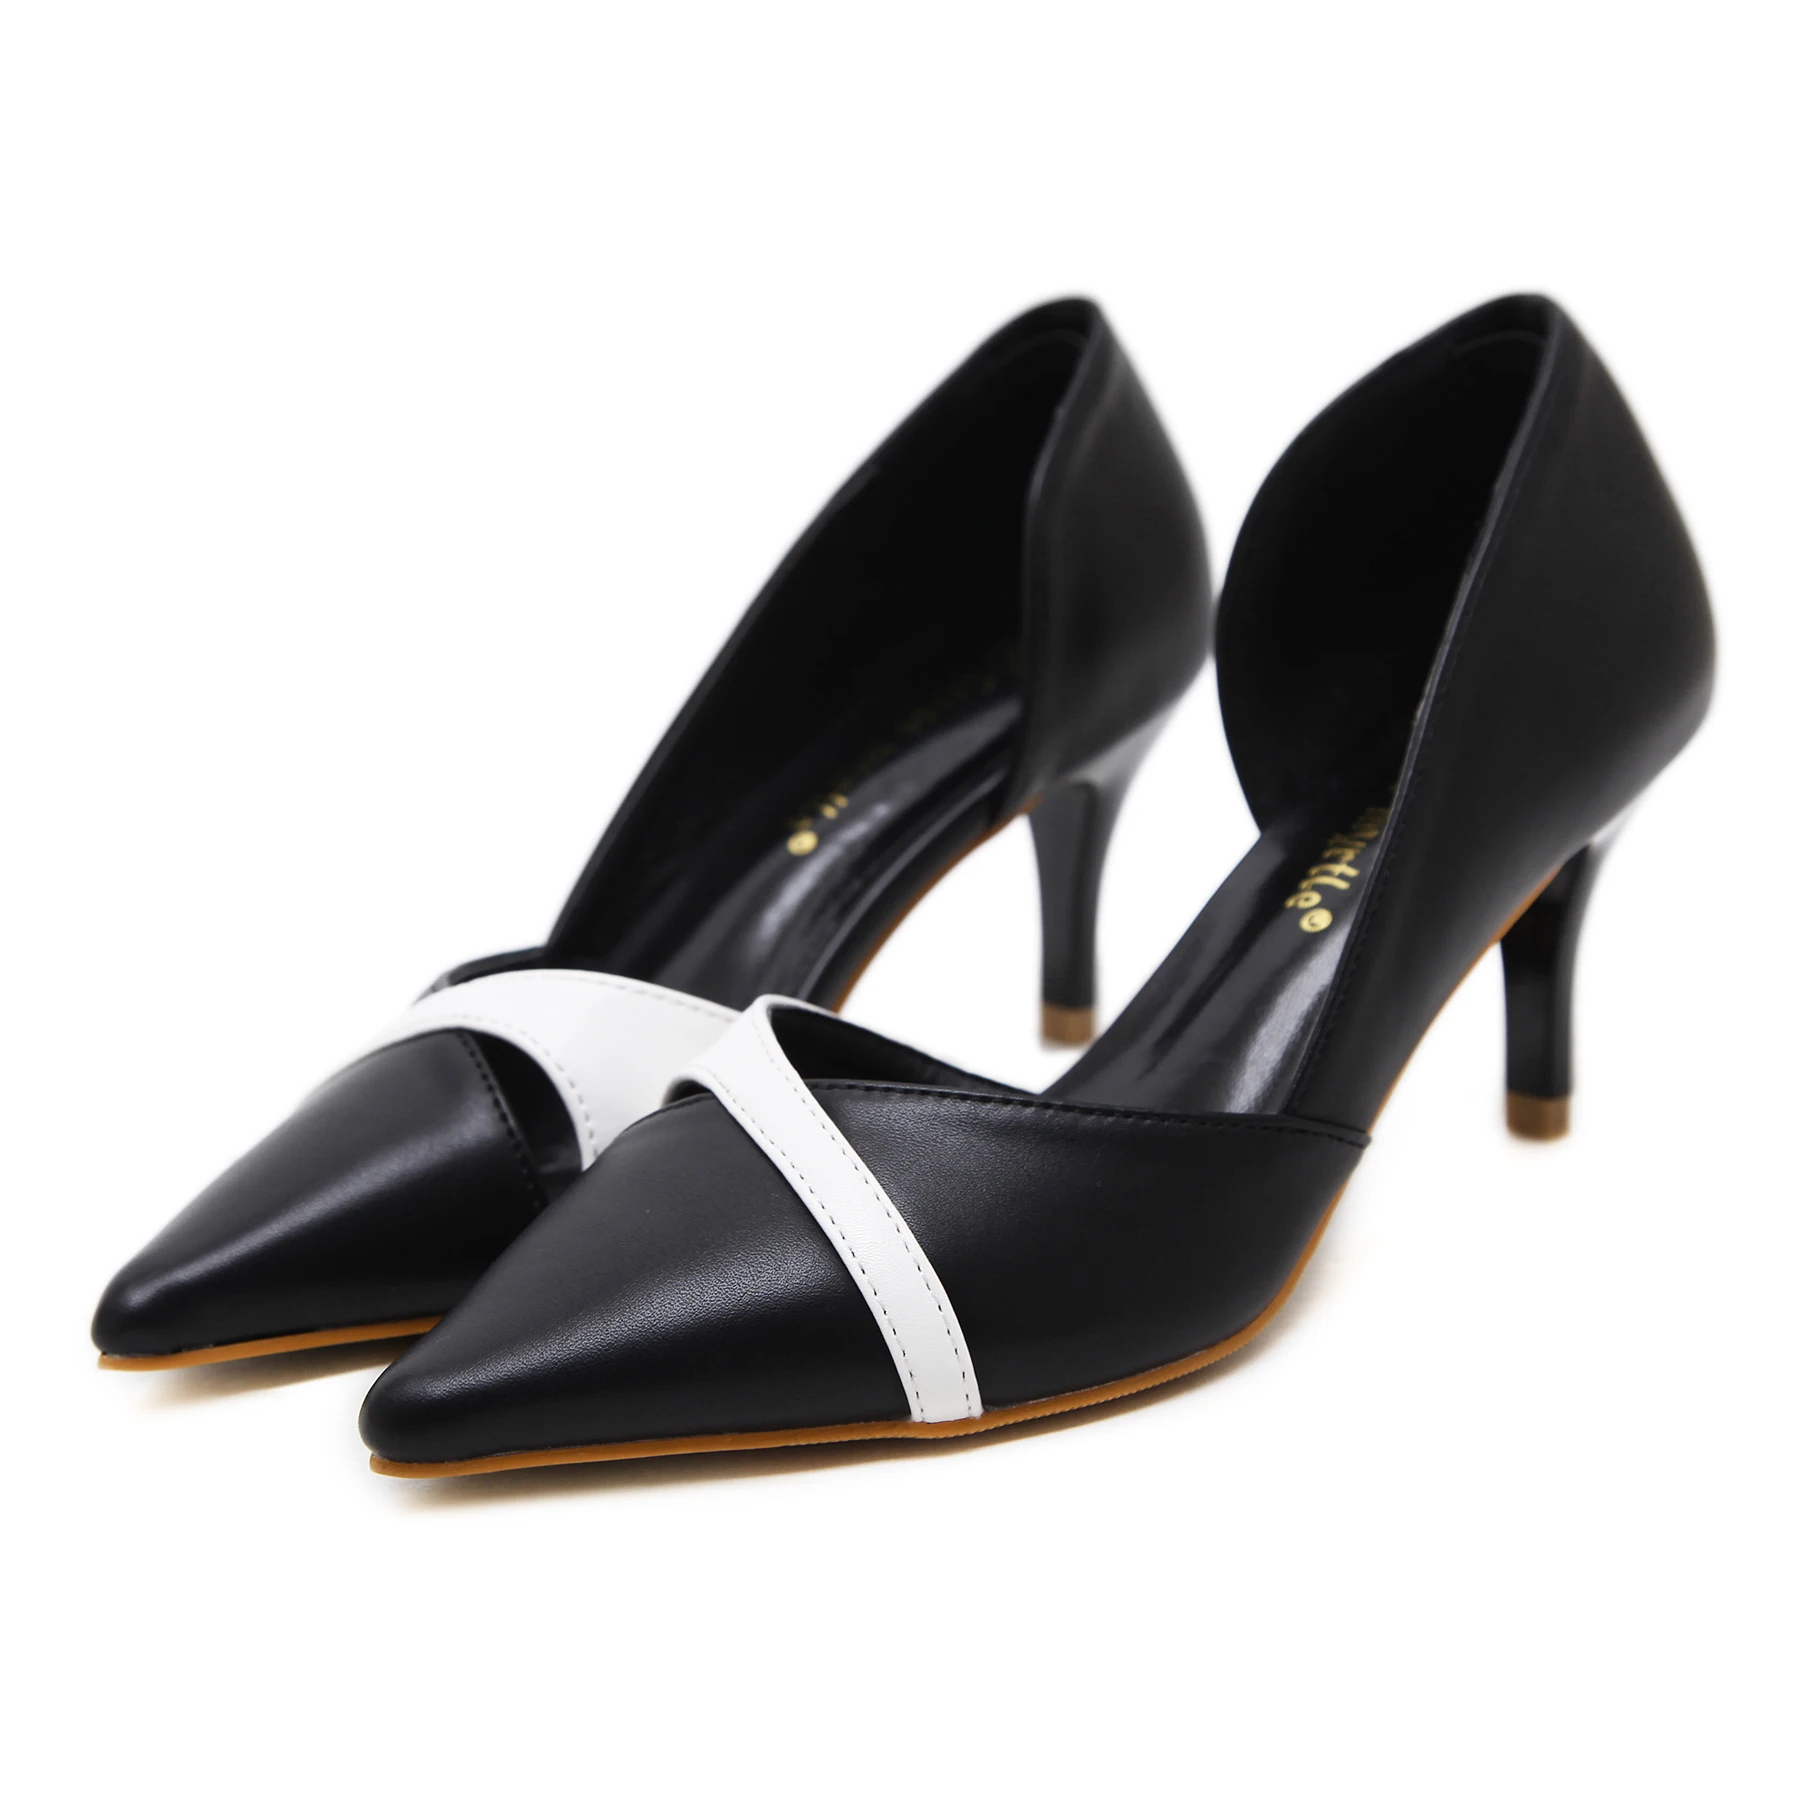 Fashion Woman Shoes Pointed Toe Woman Shoes High Heel